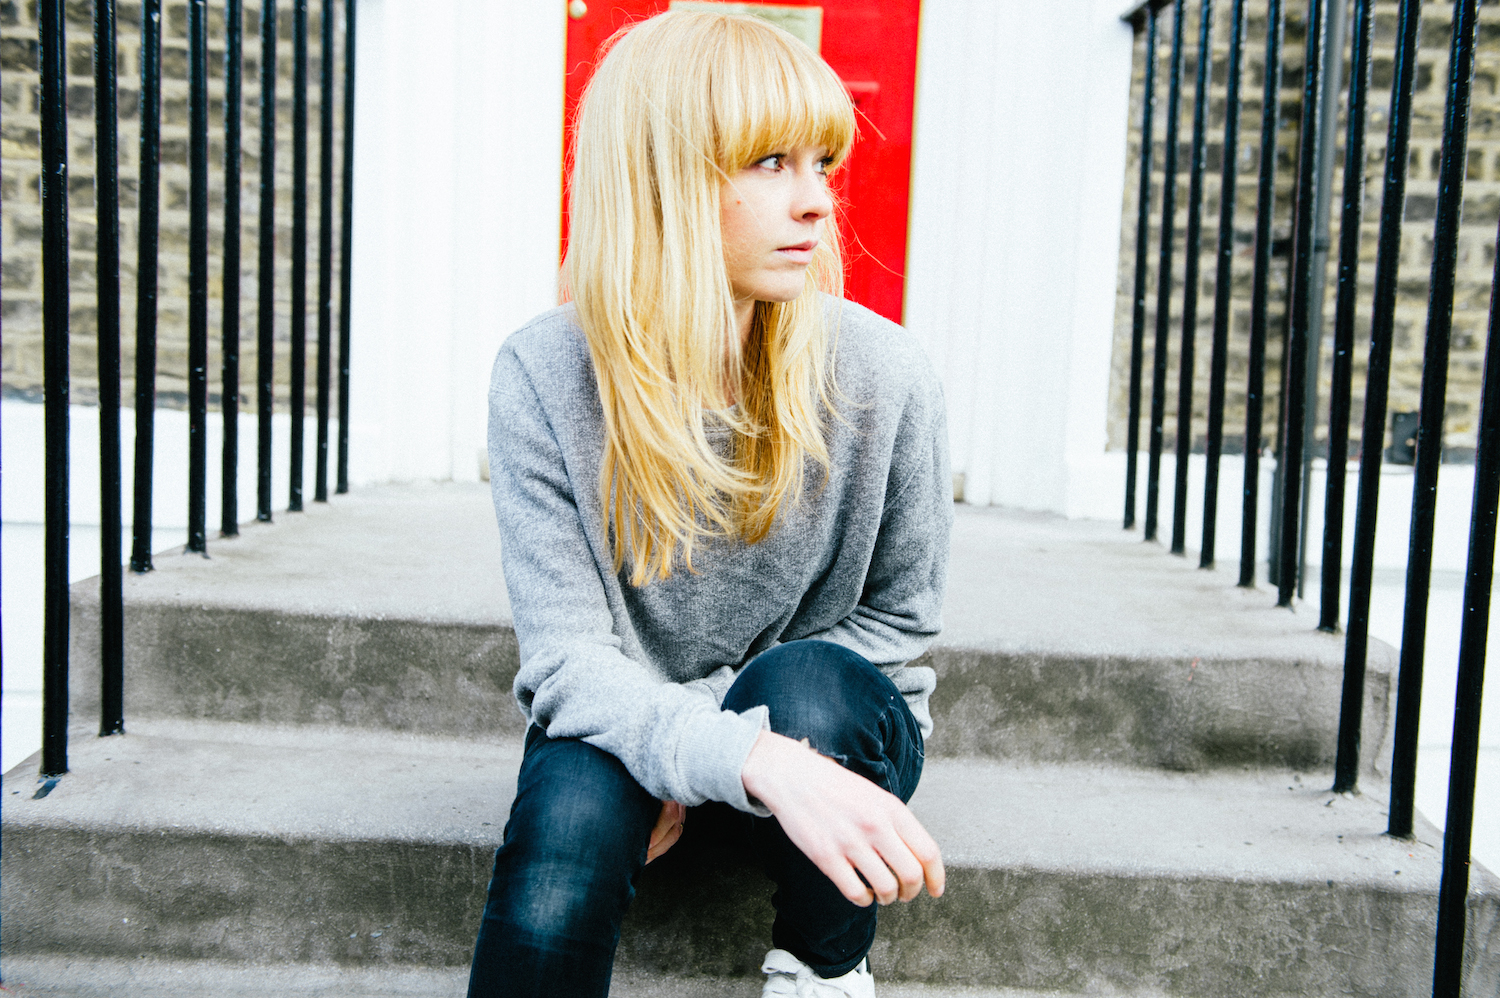 “There should be more girls”: Lucy Rose on festivals, feminism and honesty in music